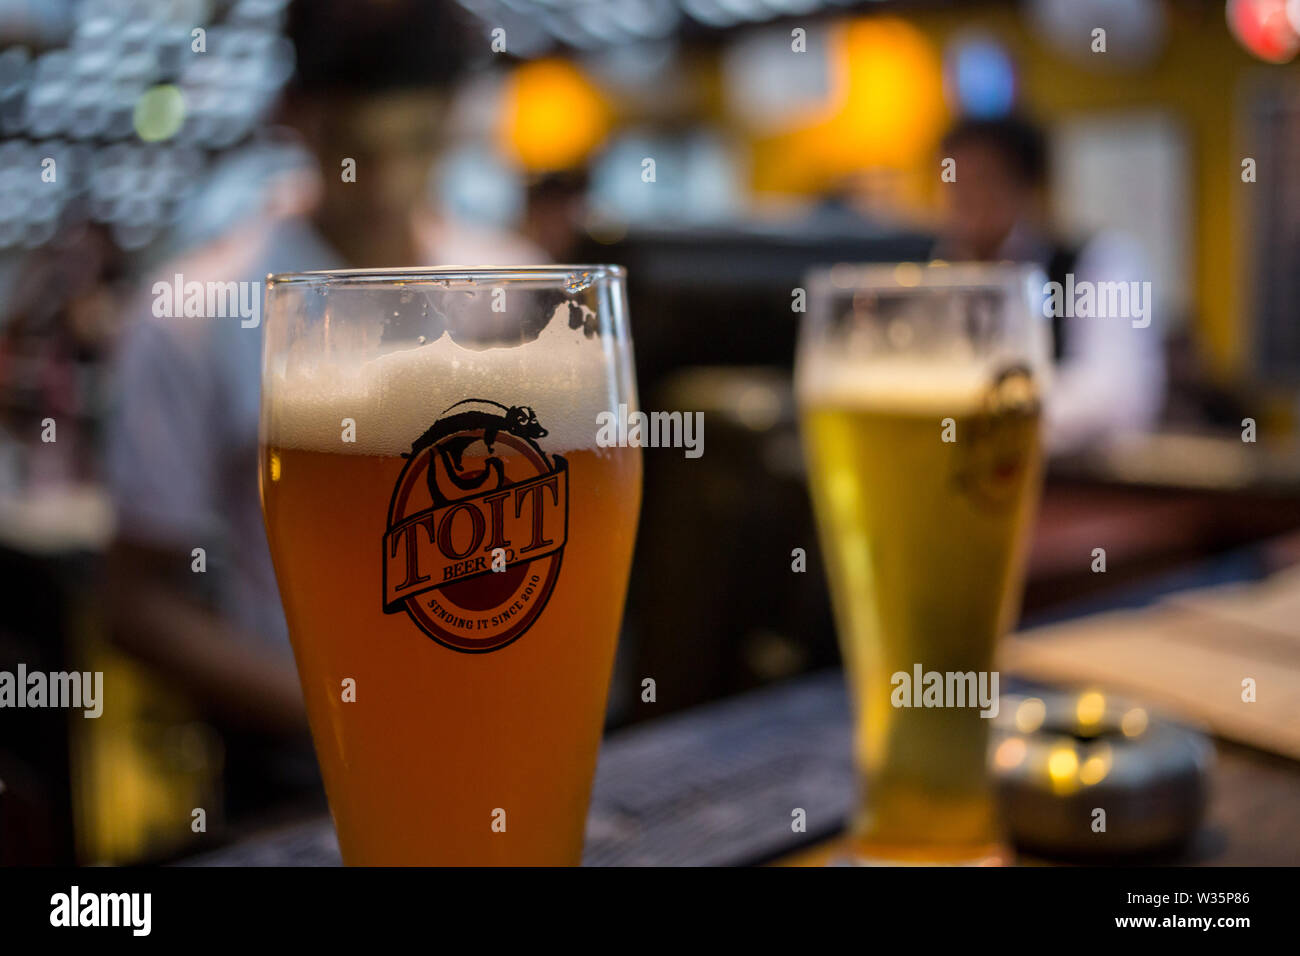 Two glasses of beer at the microbrewery Toit in Bangalore, India. Stock Photo